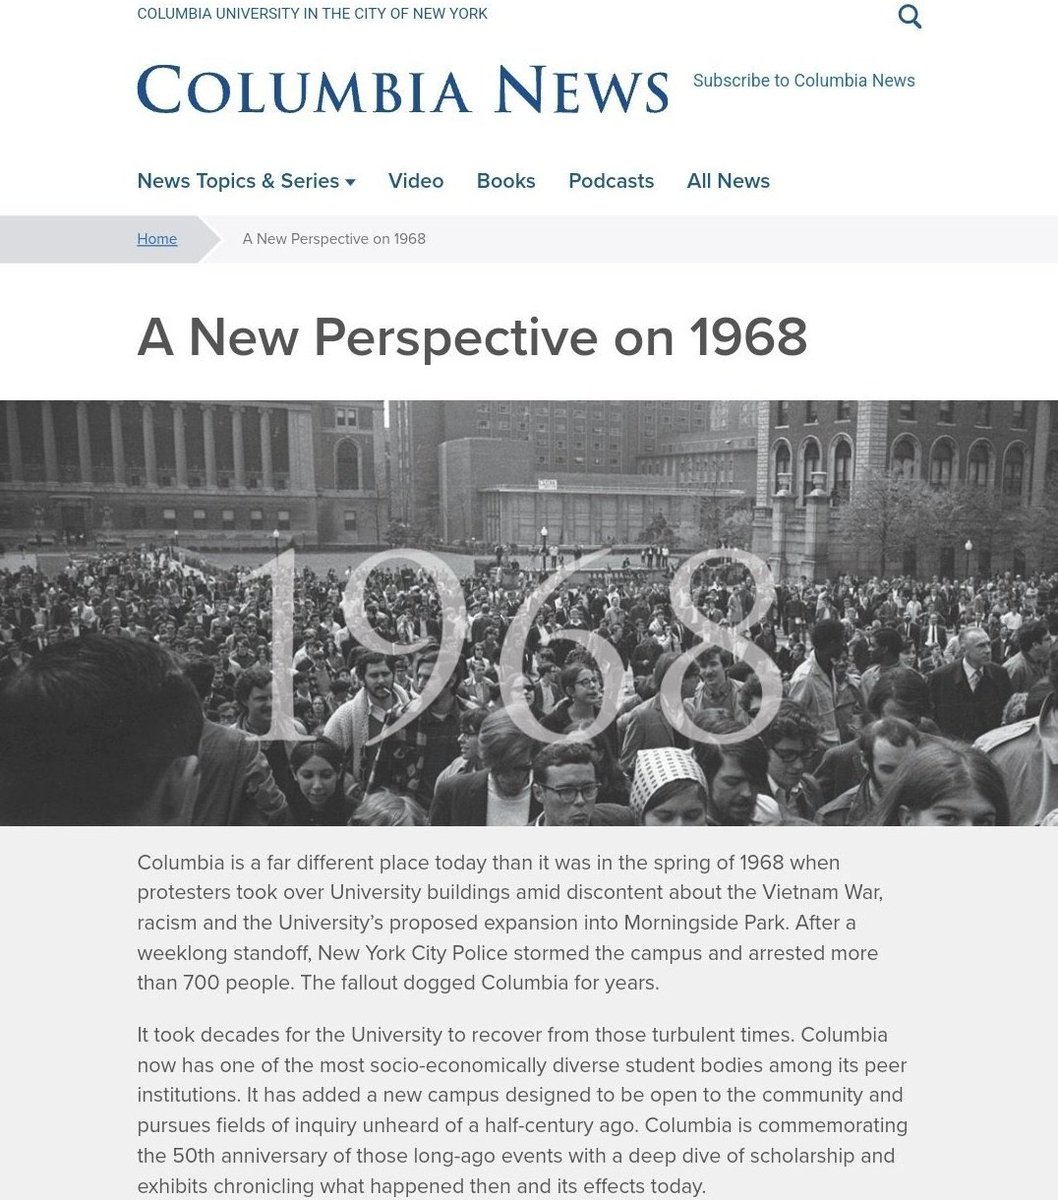 Reminder that Columbia University's own website has a page about how they were on the wrong side of history in 1968 when they called for the mass arrests of students protesting against the US war on Vietnam.